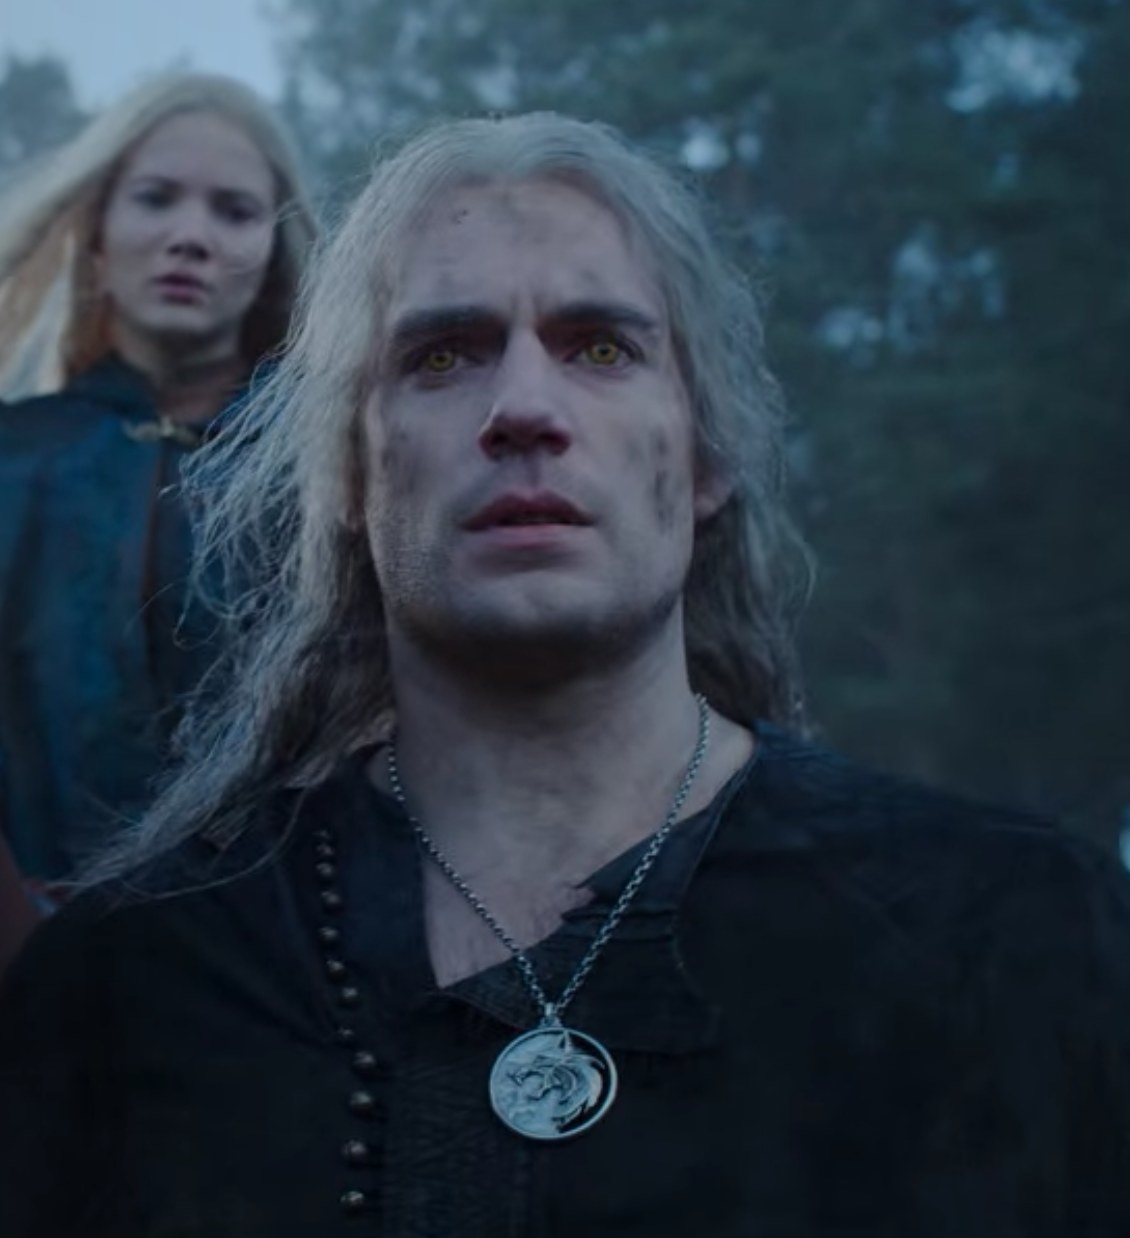 Henry Cavill as Geralt of Rivia travels alongside Ciri in &quot;The Witcher&quot; Season 2, Episode 1, &quot;A Gain of Truth&quot;